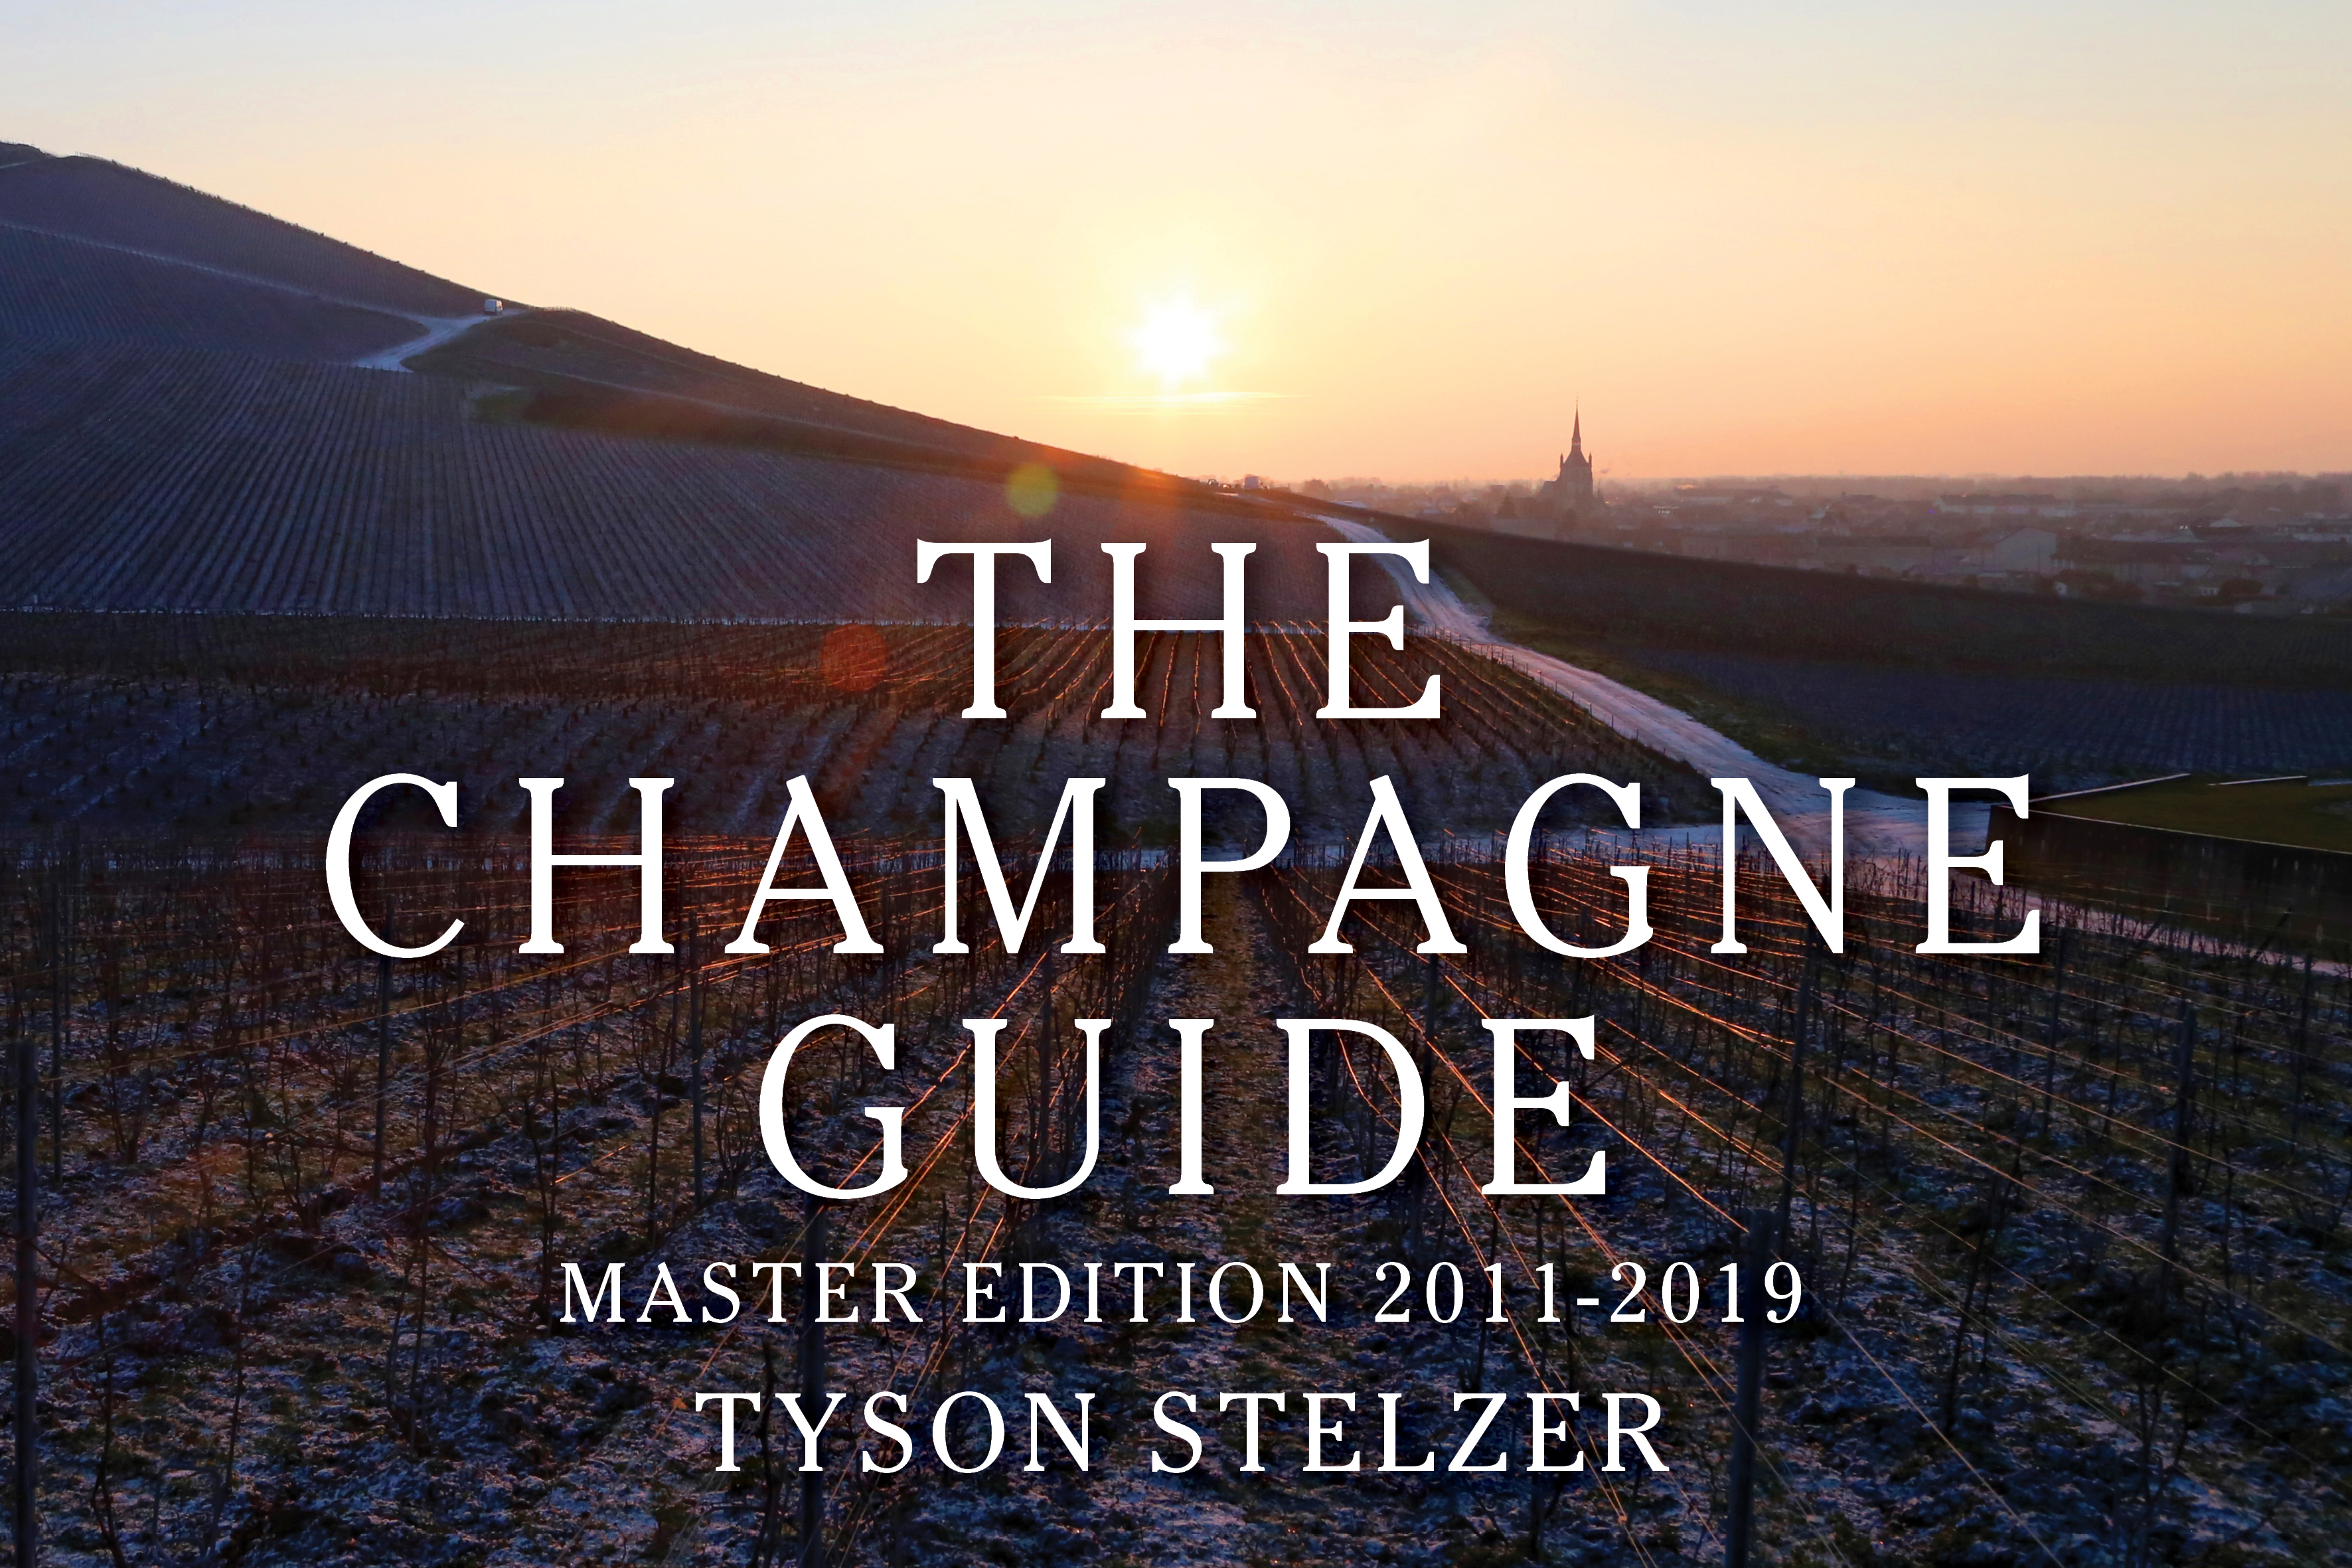 Protected: The Champagne Guide Master Edition 2011-2019